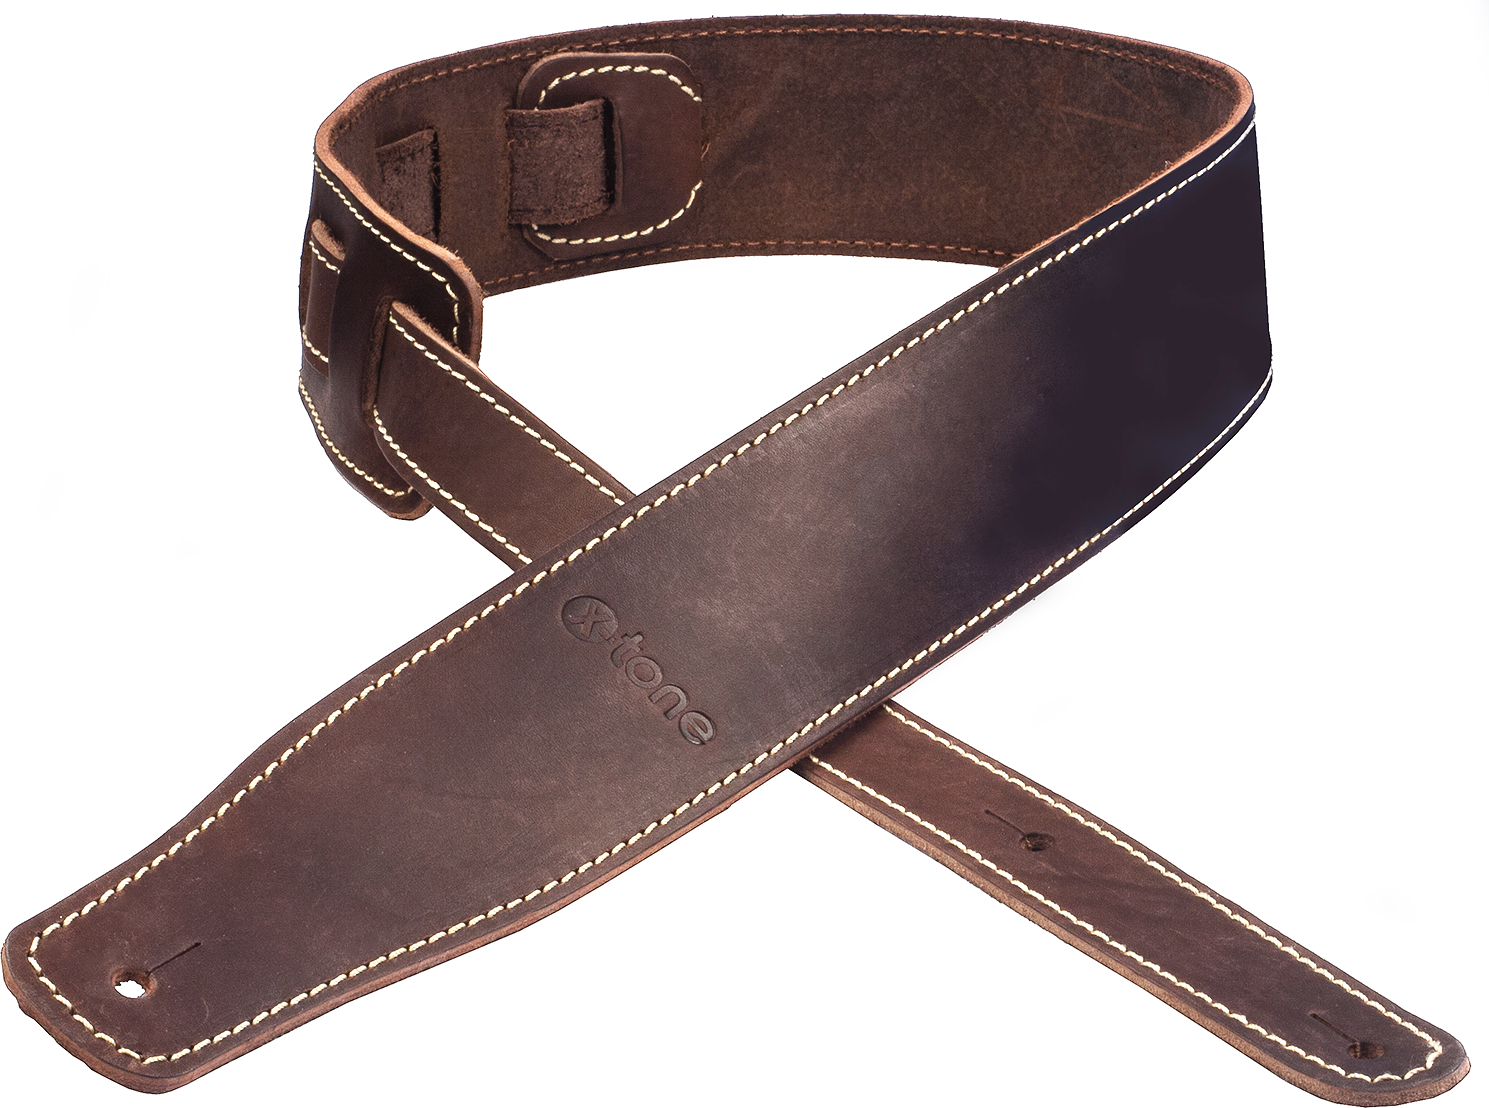 X-tone Xg 3151 Classic Leather Guitar Strap Cuir 6.5cm Brown - Sangle Courroie - Main picture